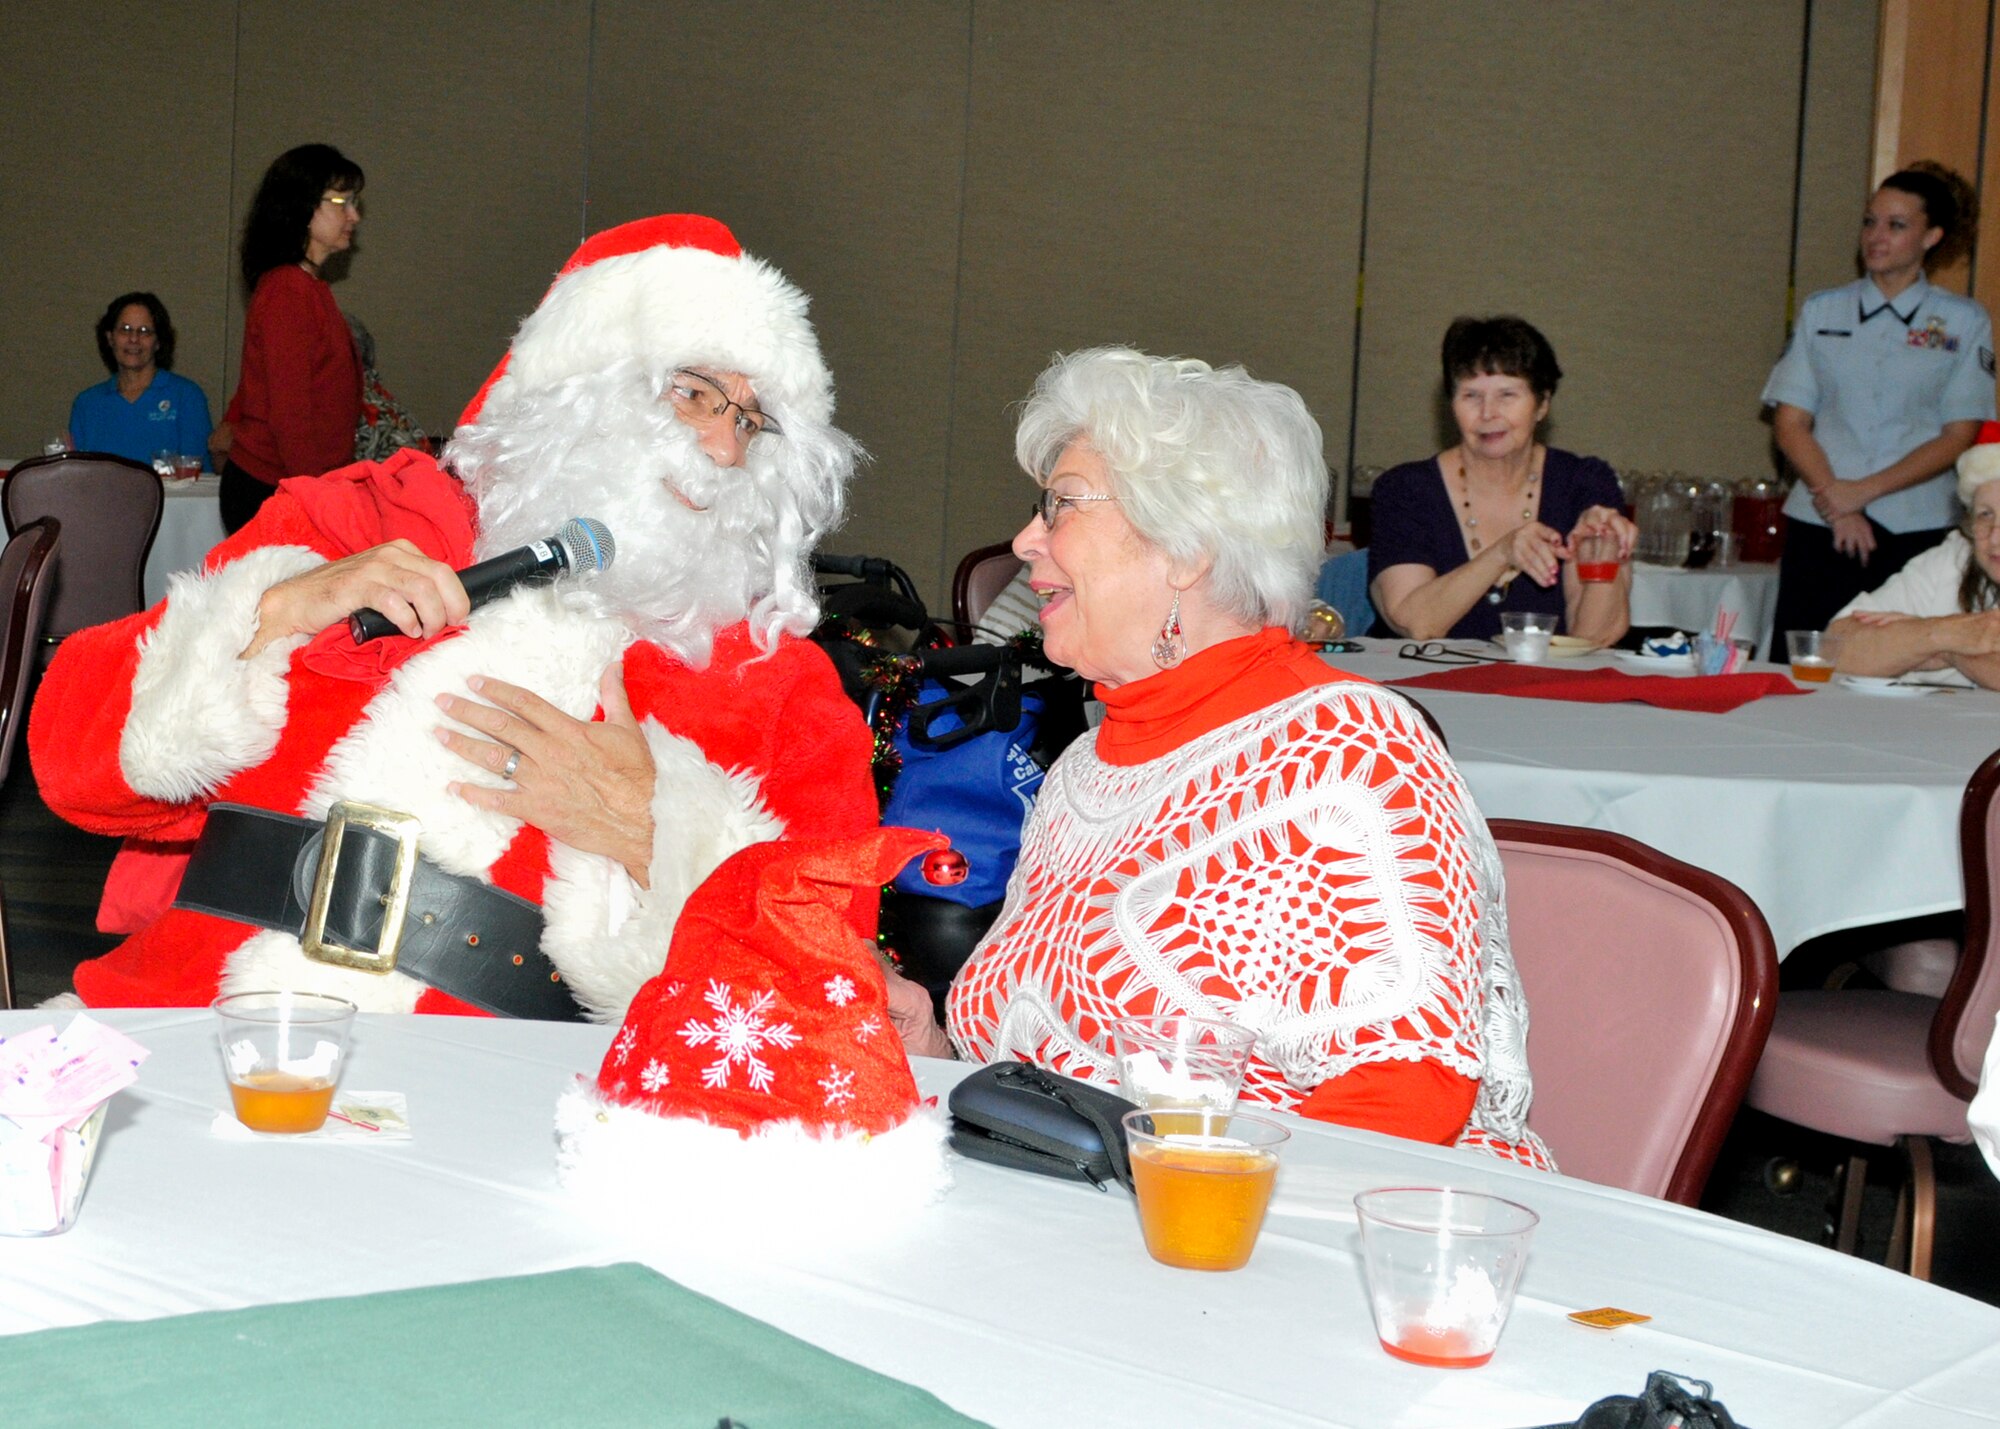 'Santa' says hello to an attendee at Tyndall's 26th Annual Golden Age Holiday Party Dec. 4. The party is for senior citizens from the Bay County Council on Aging, Sims Veterans Home and others from across the Panama City and Mexico Beach senior communities. During the party, guests are treated to cookies, pizza, finger sandwiches and dancing. The event began as way to say thank you to local veterans in senior communities during the holiday season. However, it has grown to include spreading holiday well wishes to local seniors as well. The Tyndall Chief’s Group sponsors the party. (U.S. Air Force photo by Susan Trahan)